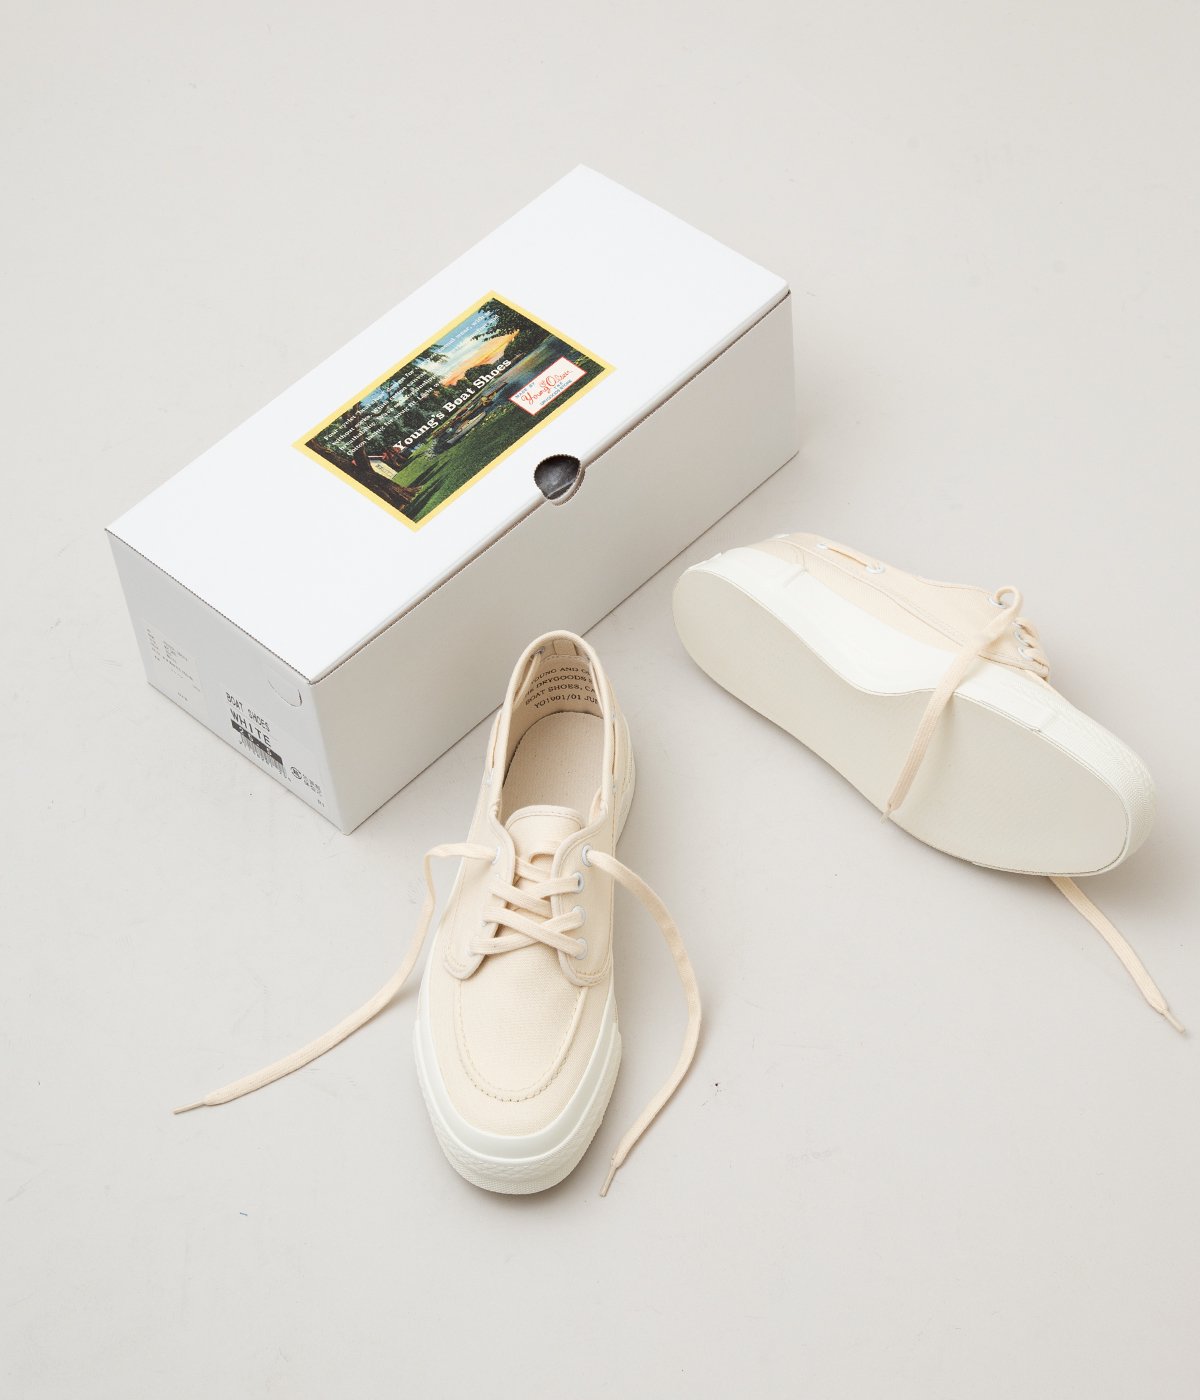 YOUNG&OLSEN "BOAT SHOES"